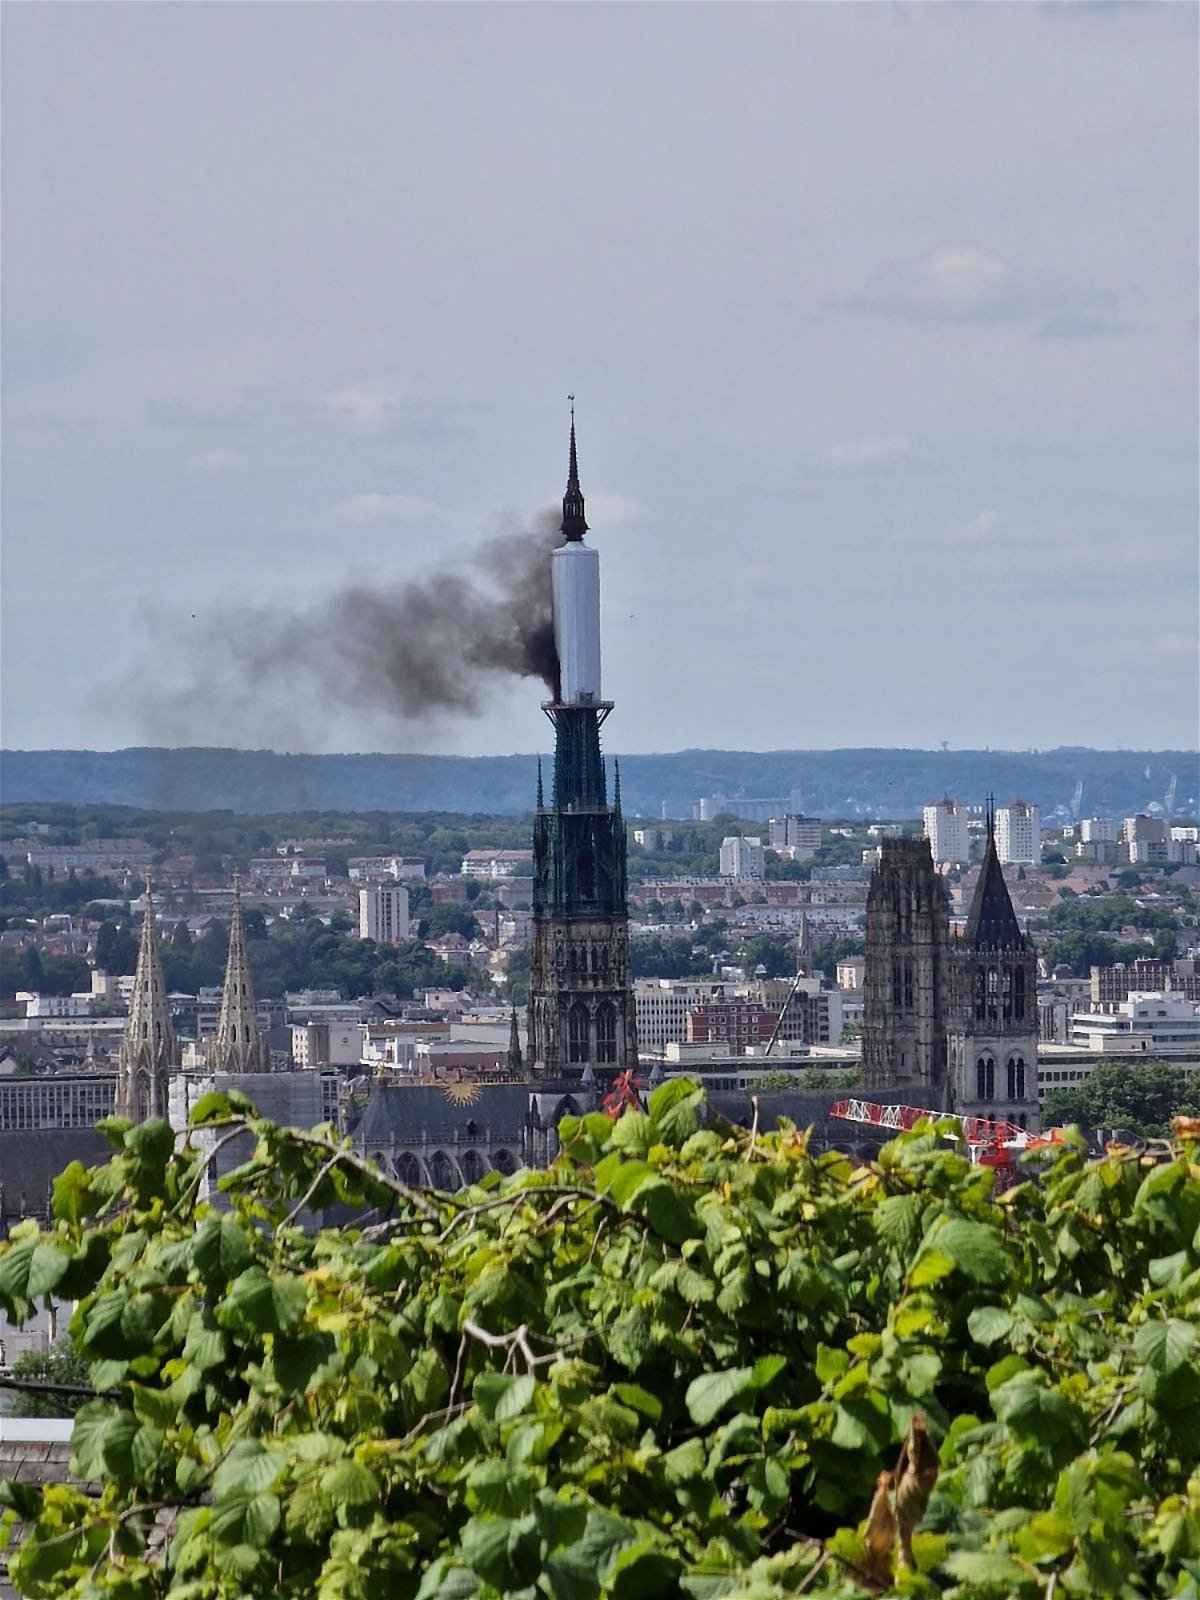 <i>Patrick Streiff/AFP/Getty Images via CNN Newsource</i><br/>Smoke billows from the spire of Rouen Cathedral in Rouen